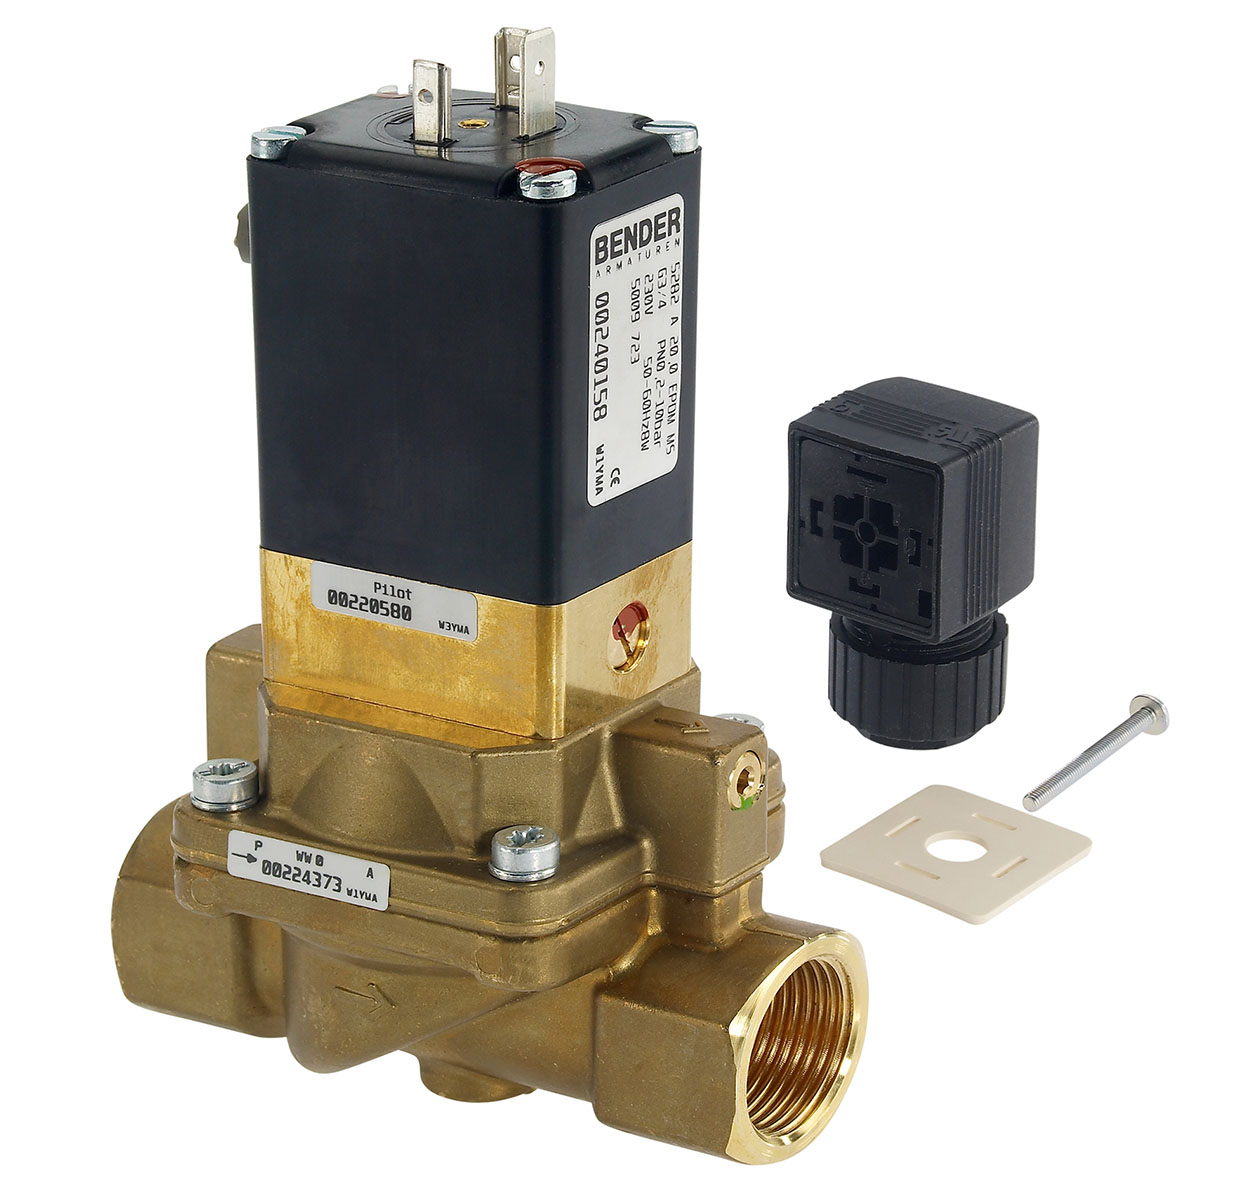 5009725 - 2/2 way solenoid valve normally closed for lightly soiled fluids Type 7; female thread